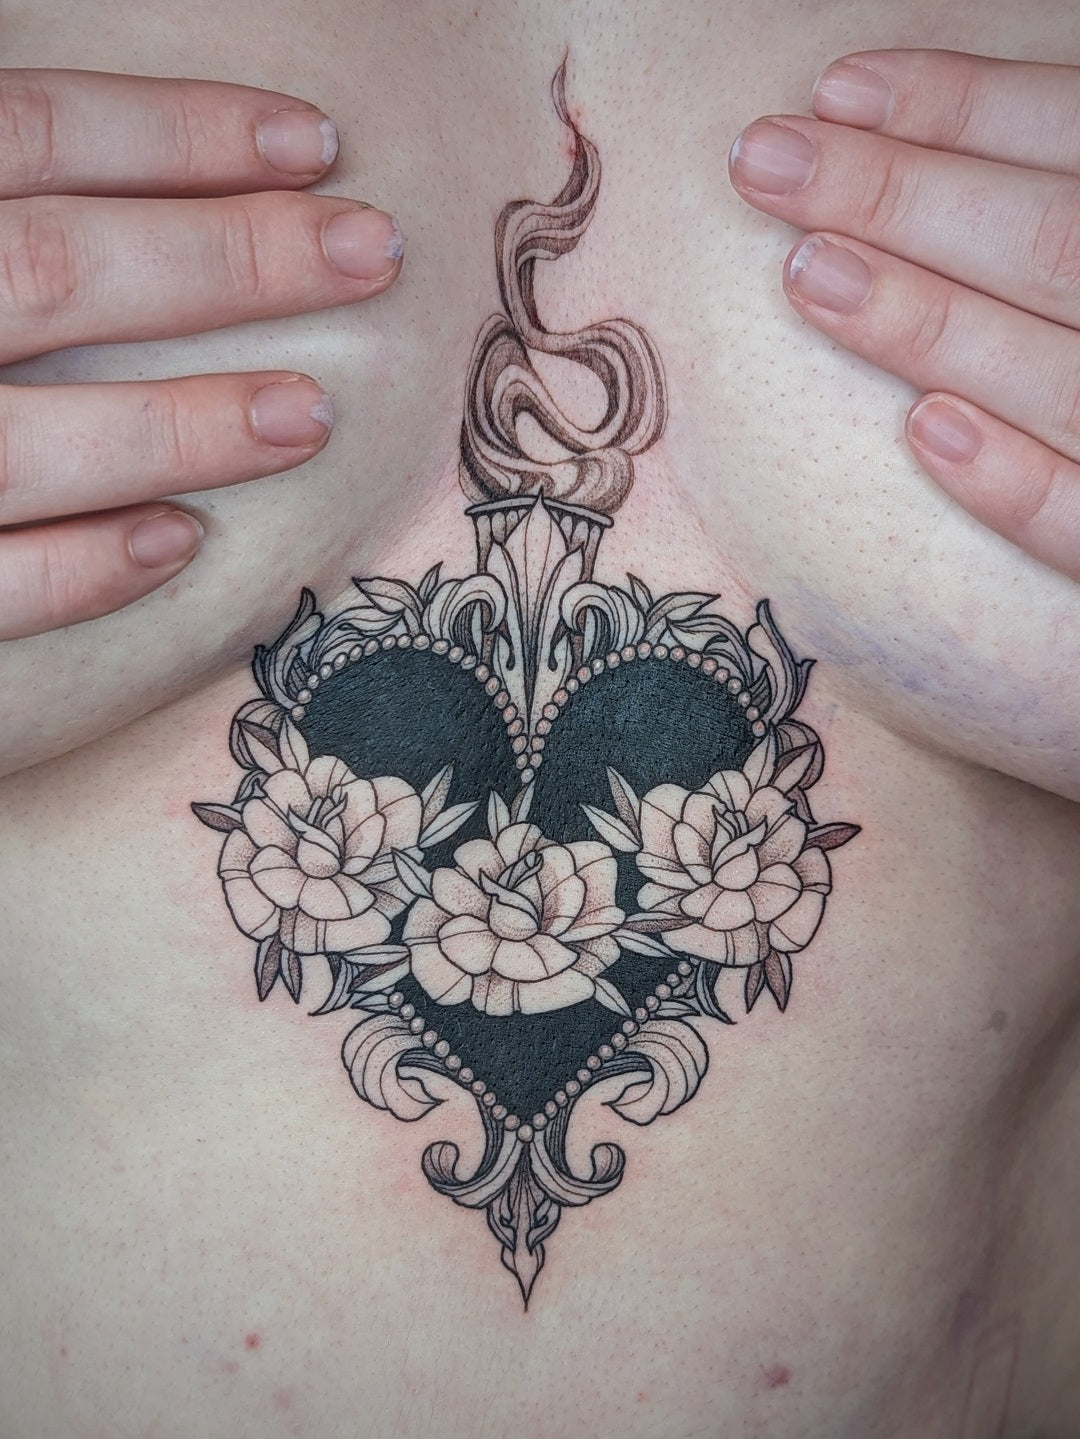 Sternum tattoos: What you need to know